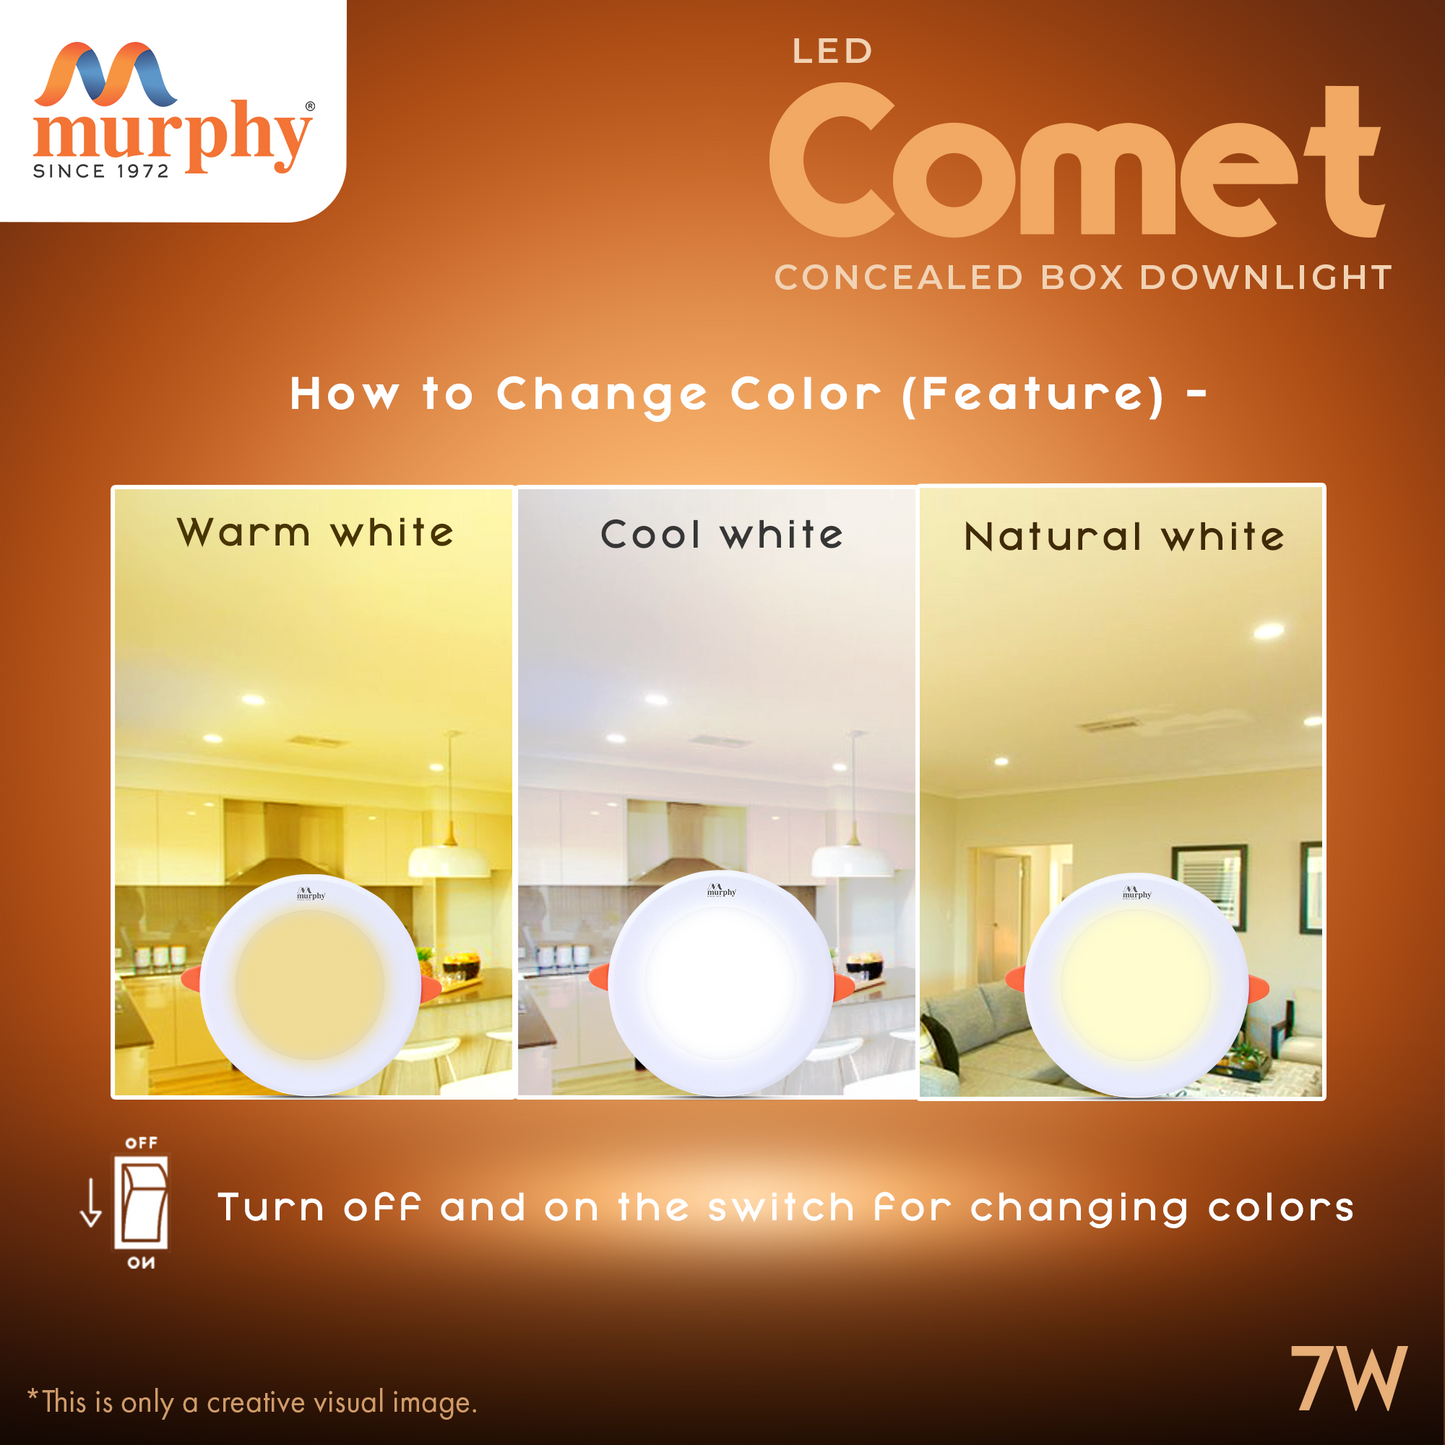 Murphy 7W Comet LED 3-IN-1 Color Changing Down Light : Cool White + Warm White + Natural White